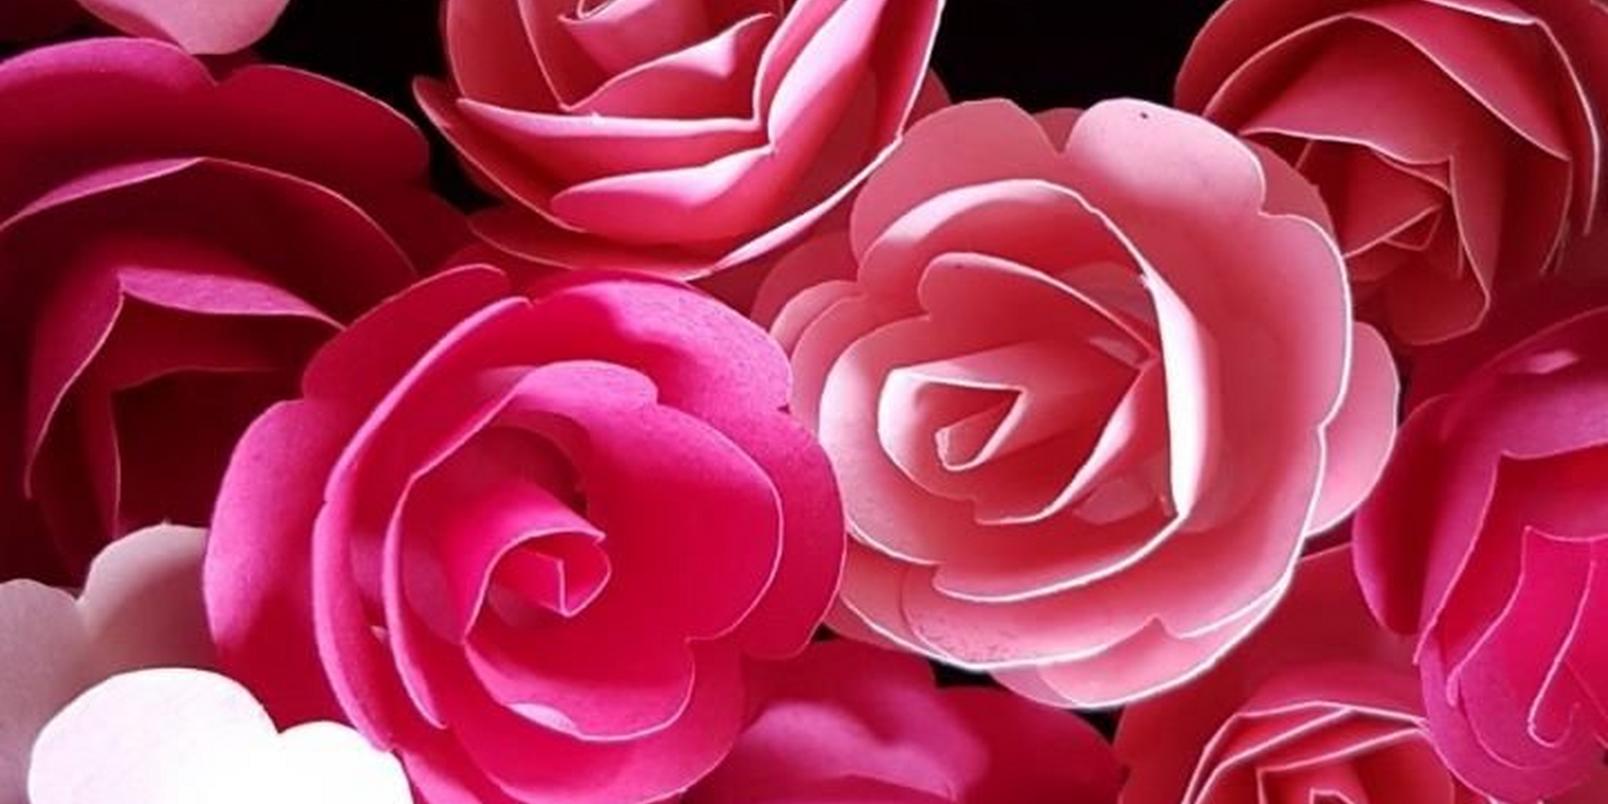 roses-pink-paper-made